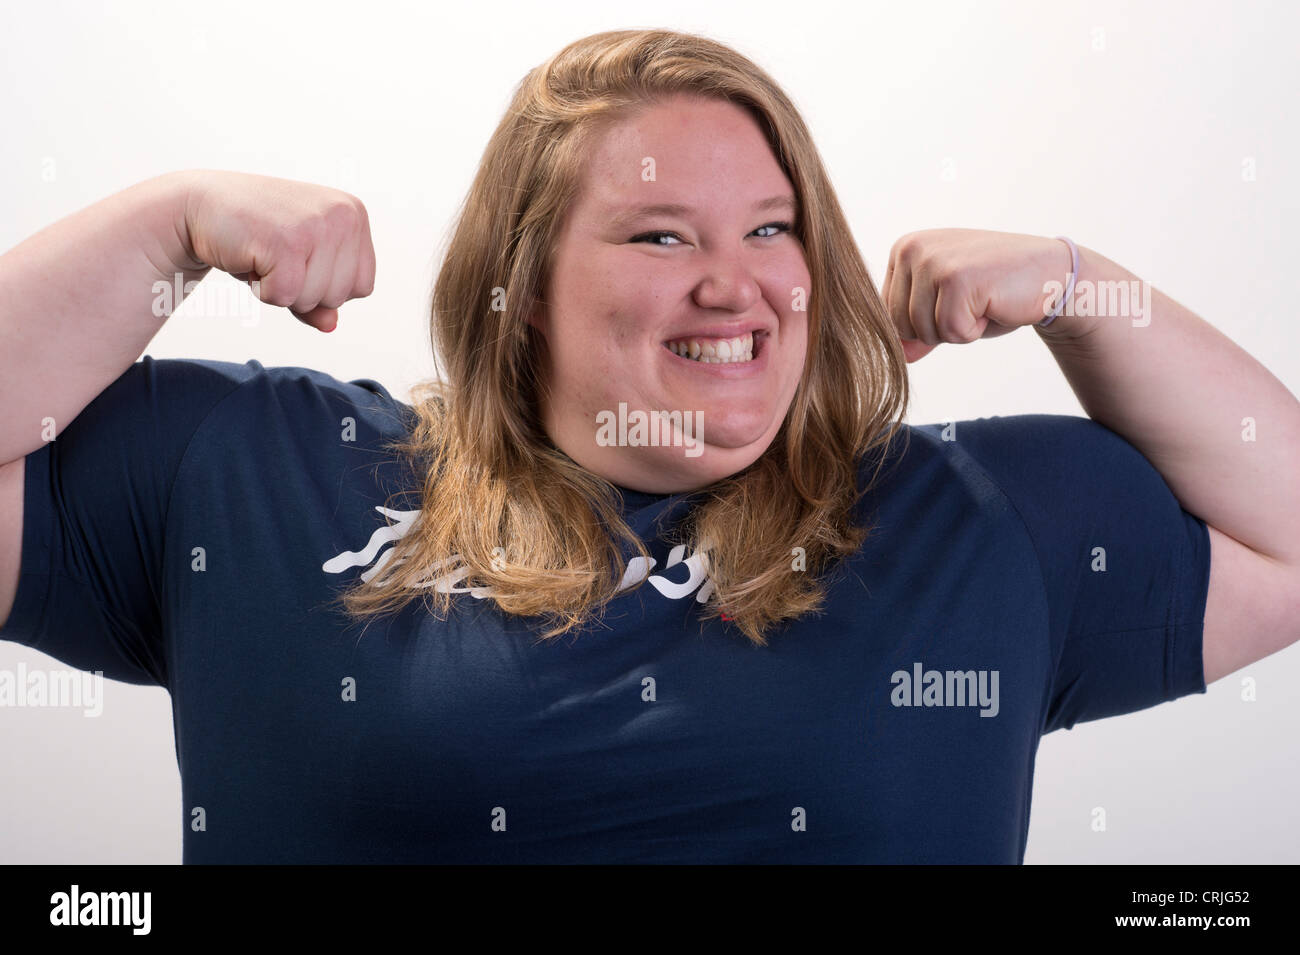 Team USA weightlifter Holley Mangold poses at the US Olympic Team media summit in Dallas Texas prior to the London Olympics Stock Photo